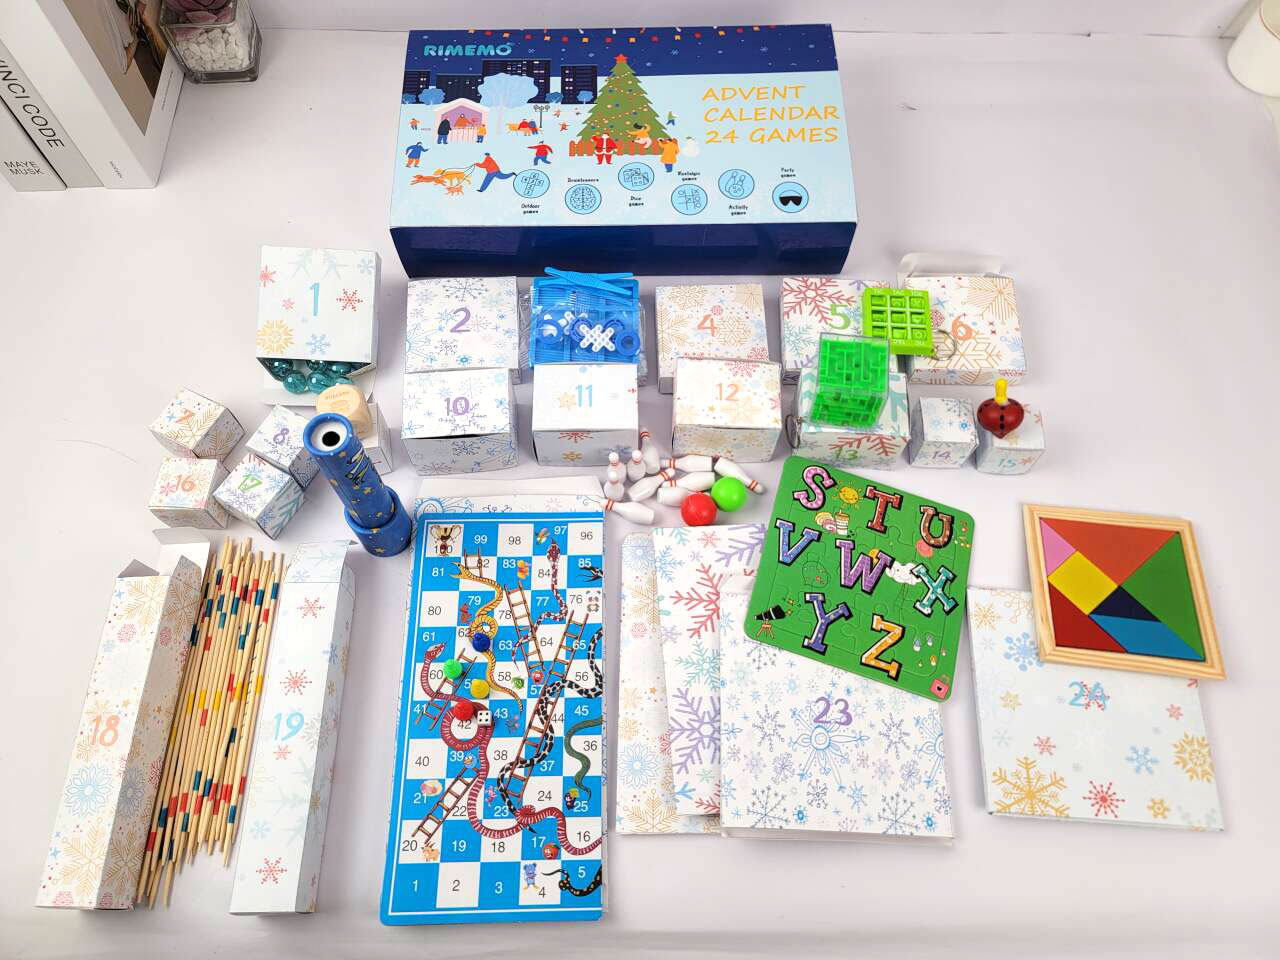 24 Advent calendar-Games-Enjoy the surprise of opening the blind box!!!